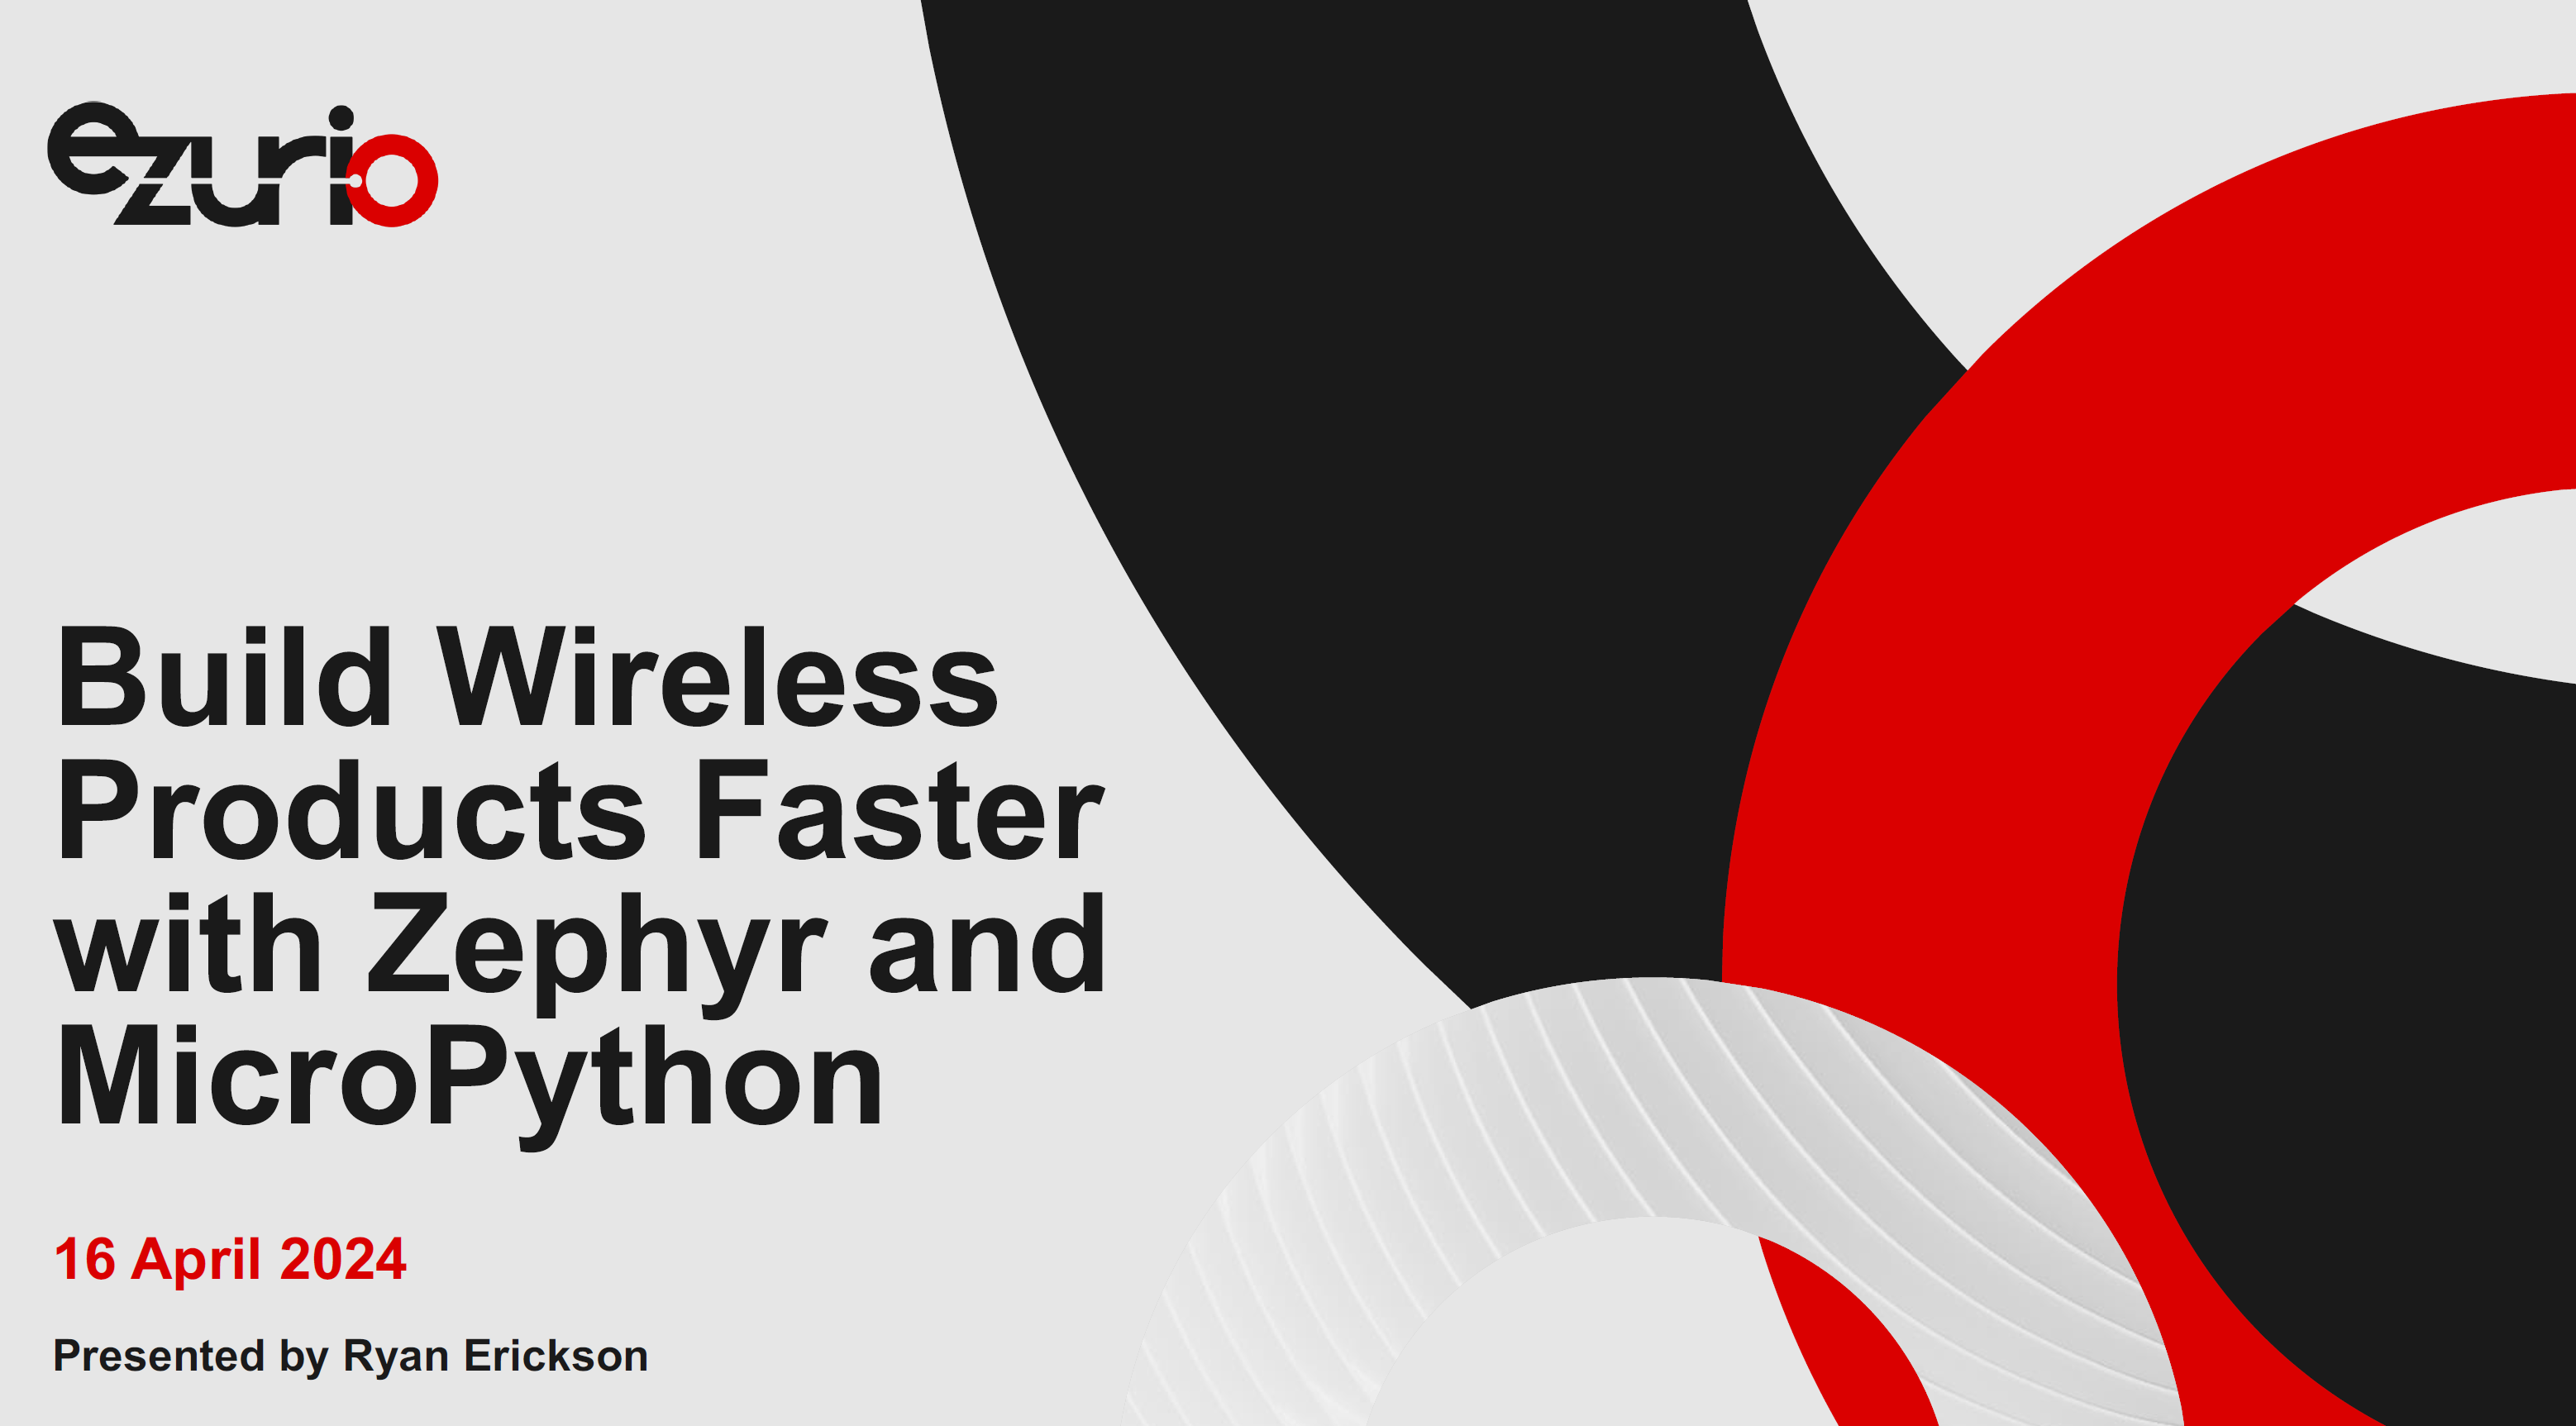 Build Wireless Products Faster with Zephyr and MicroPython